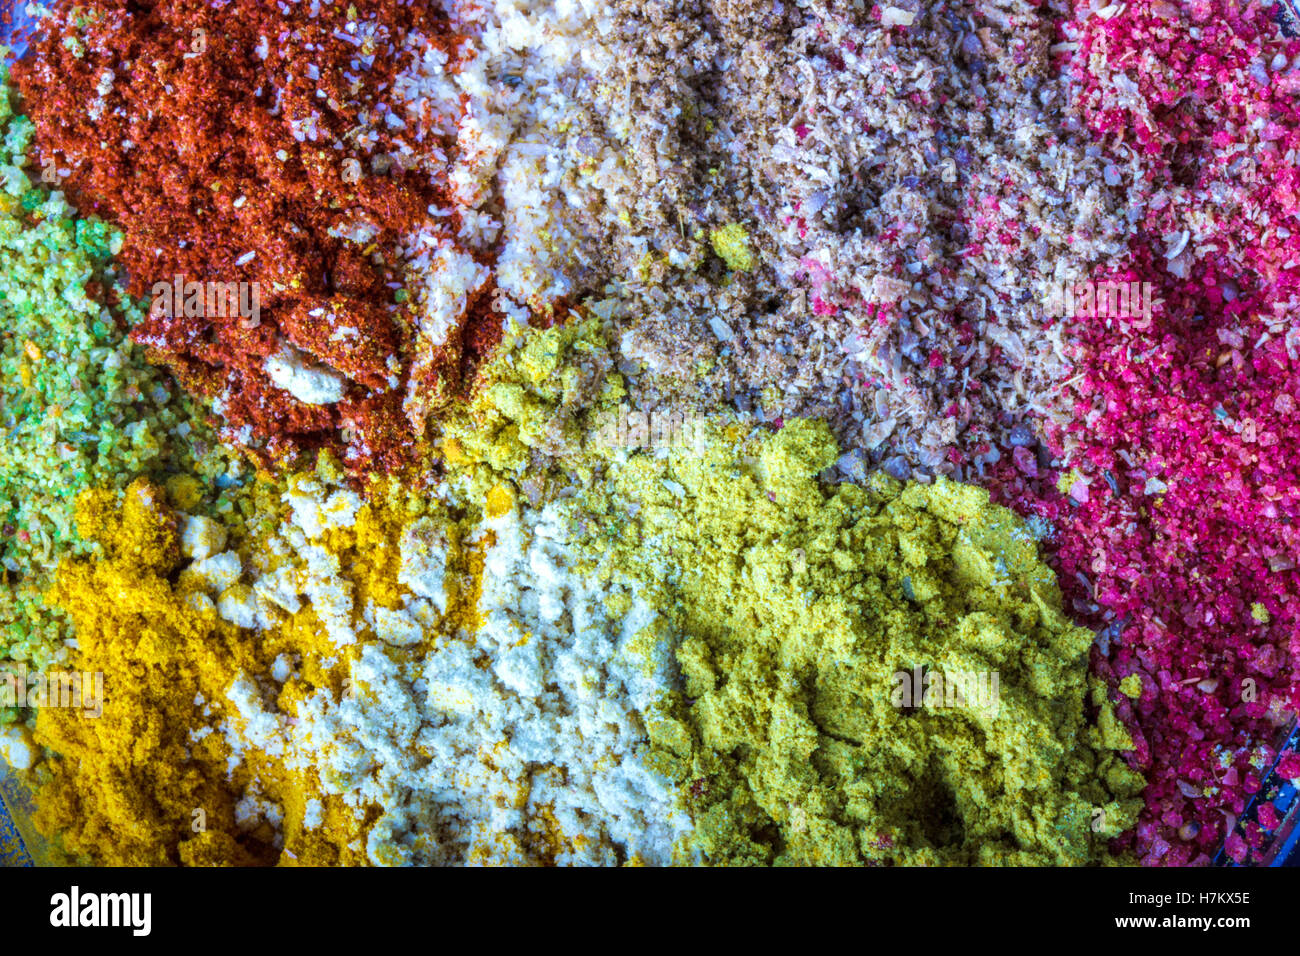 Mix of colorful aromatic Indian spices and herbs background Stock Photo